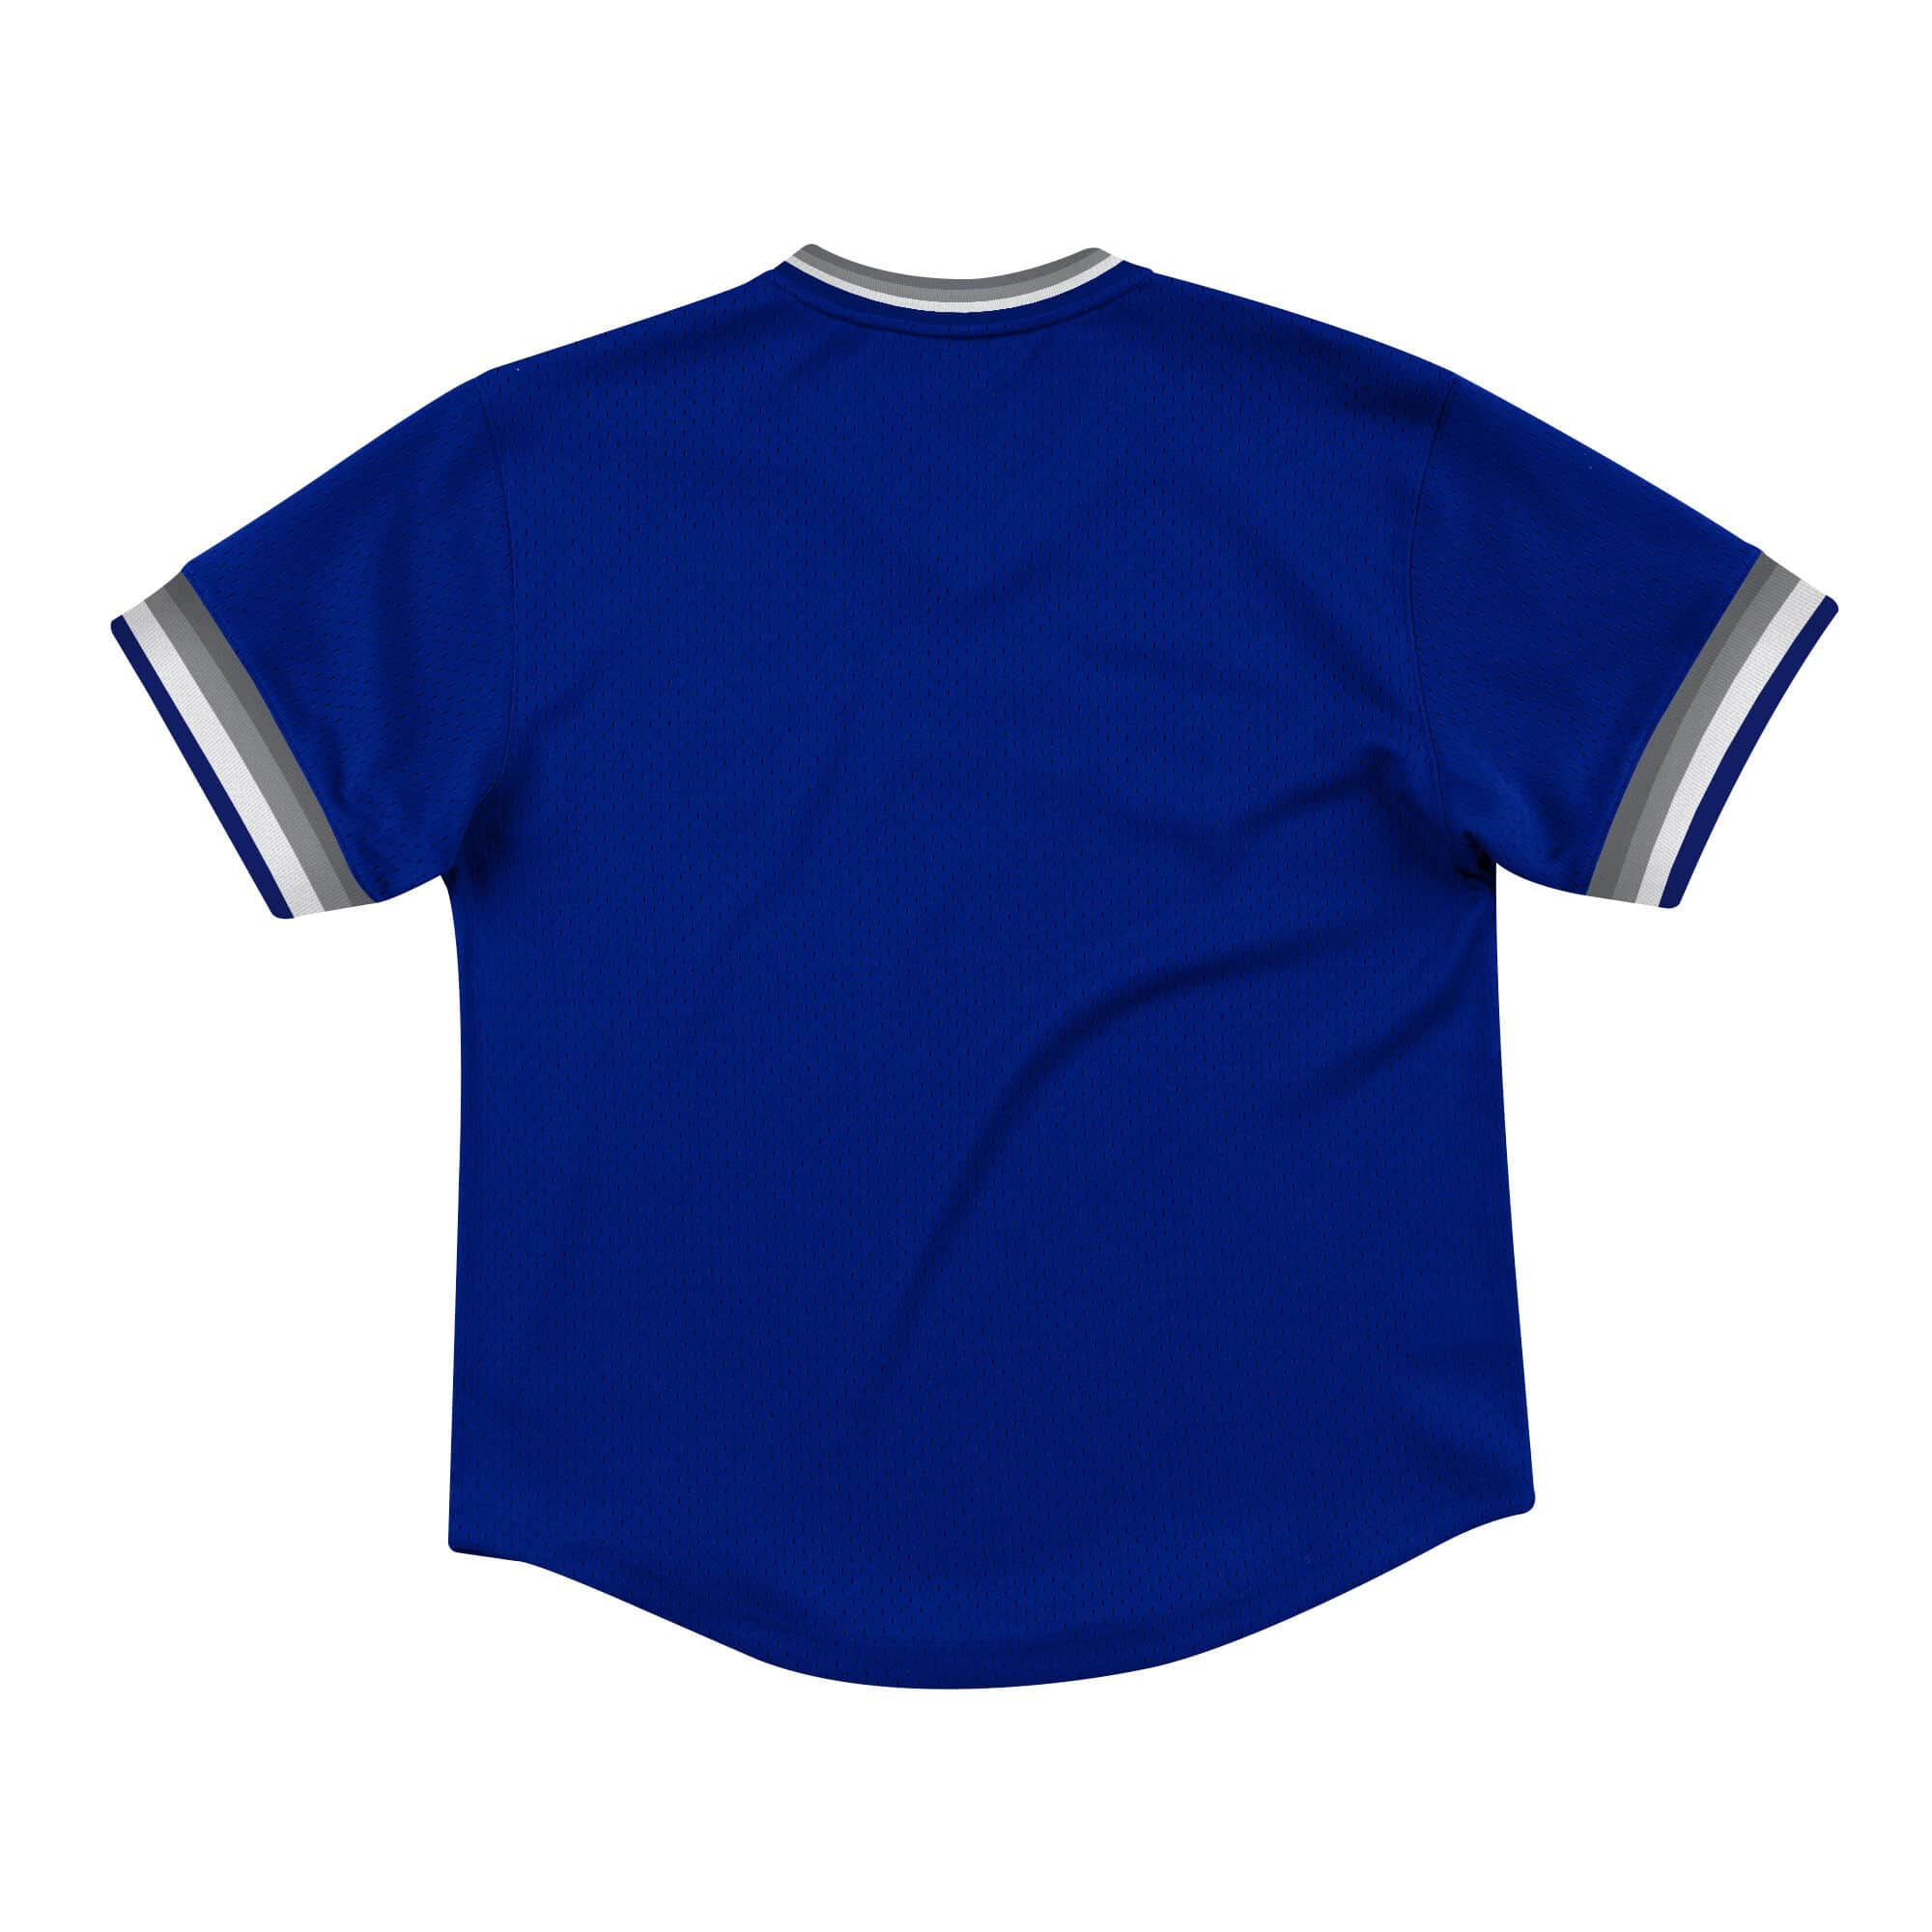 Los Angeles Dodgers Mitchell & Ness Mesh V-Neck Jersey - Royal